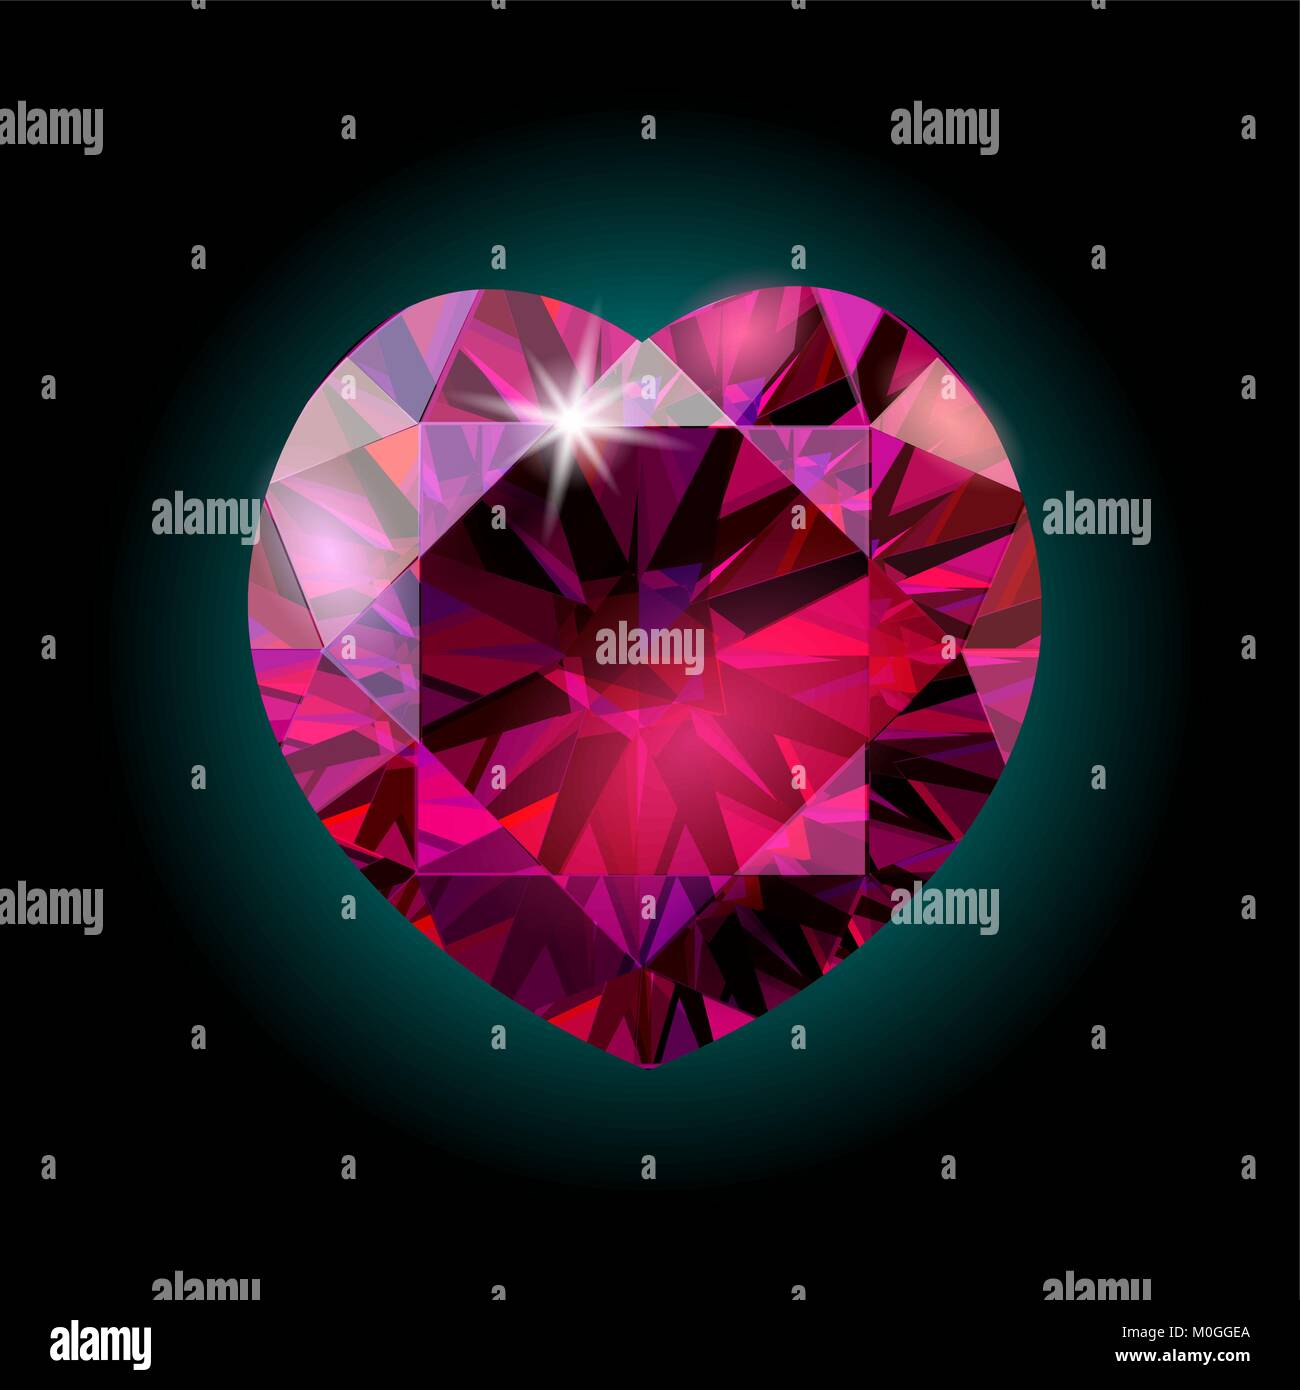 Realistic 3D detailed shiny red crystal ruby heart. Valentine Day romantic holiday decoration pink red gem diamond geometric polygonal shape vector illustration Stock Vector